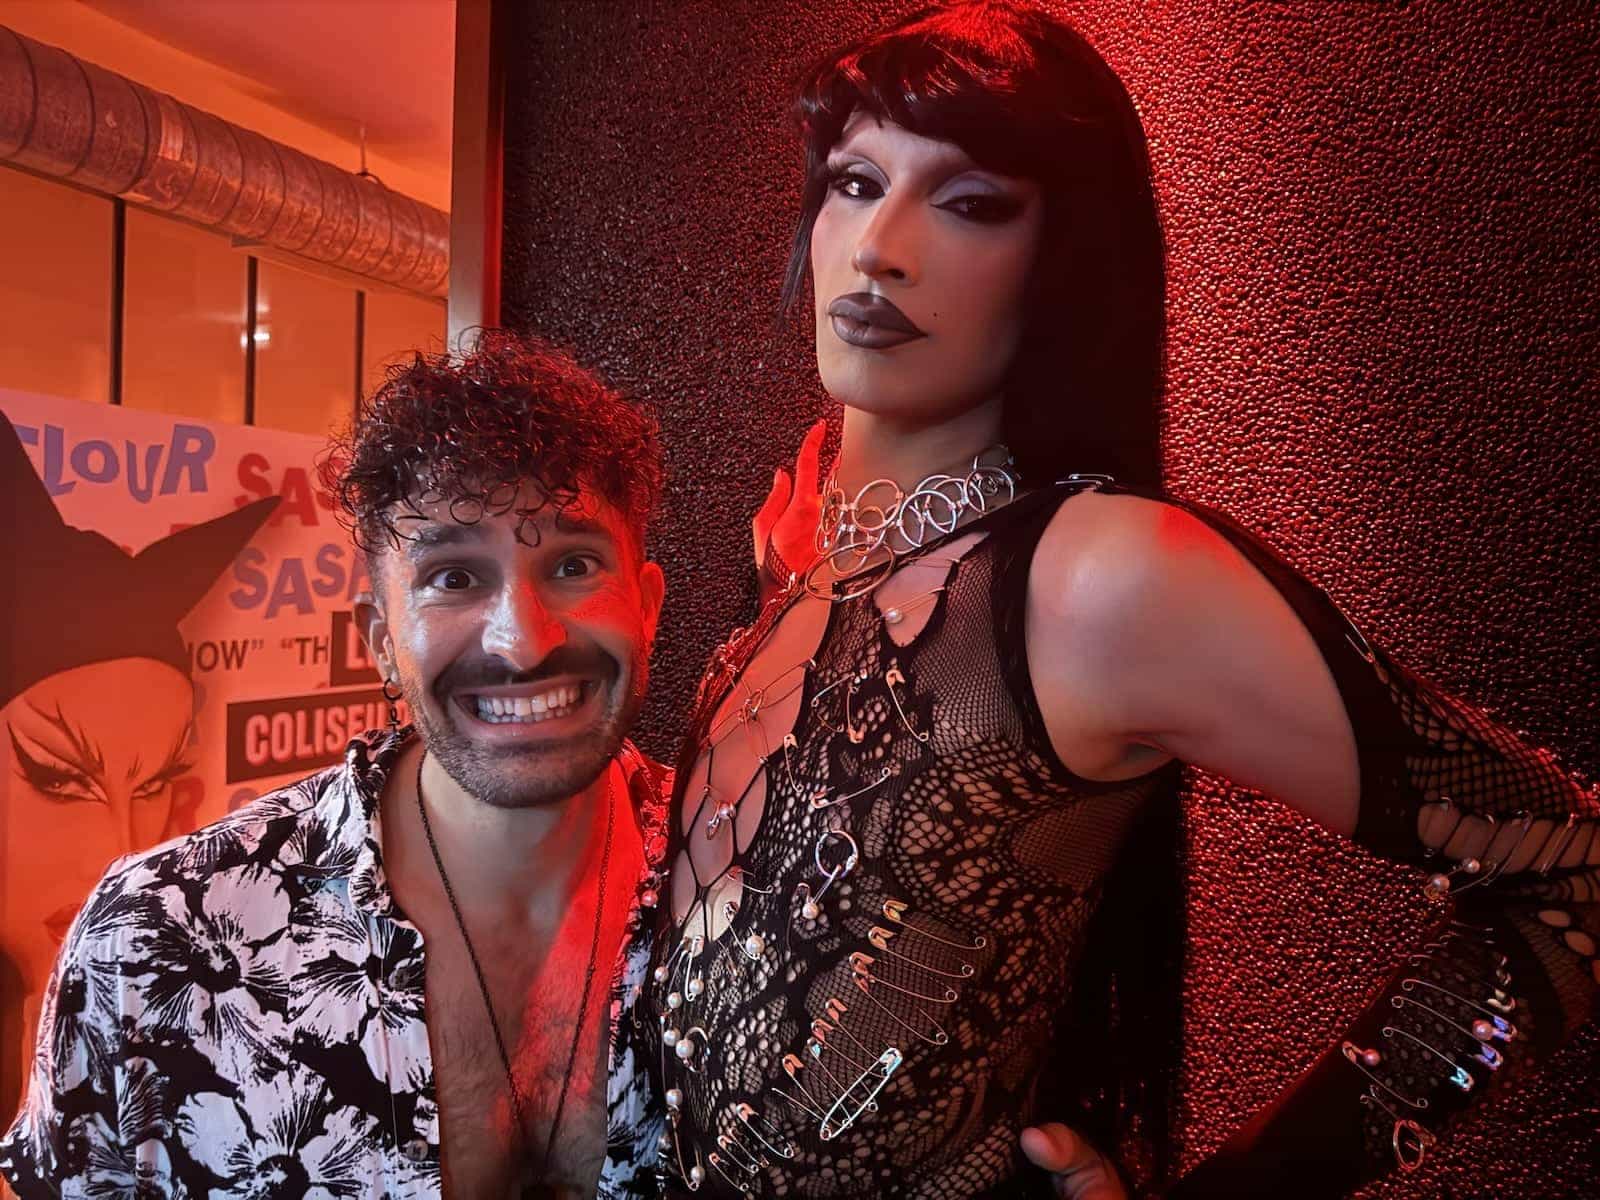 Stefan and drag queen at the Trumps gay club in Lisbon.